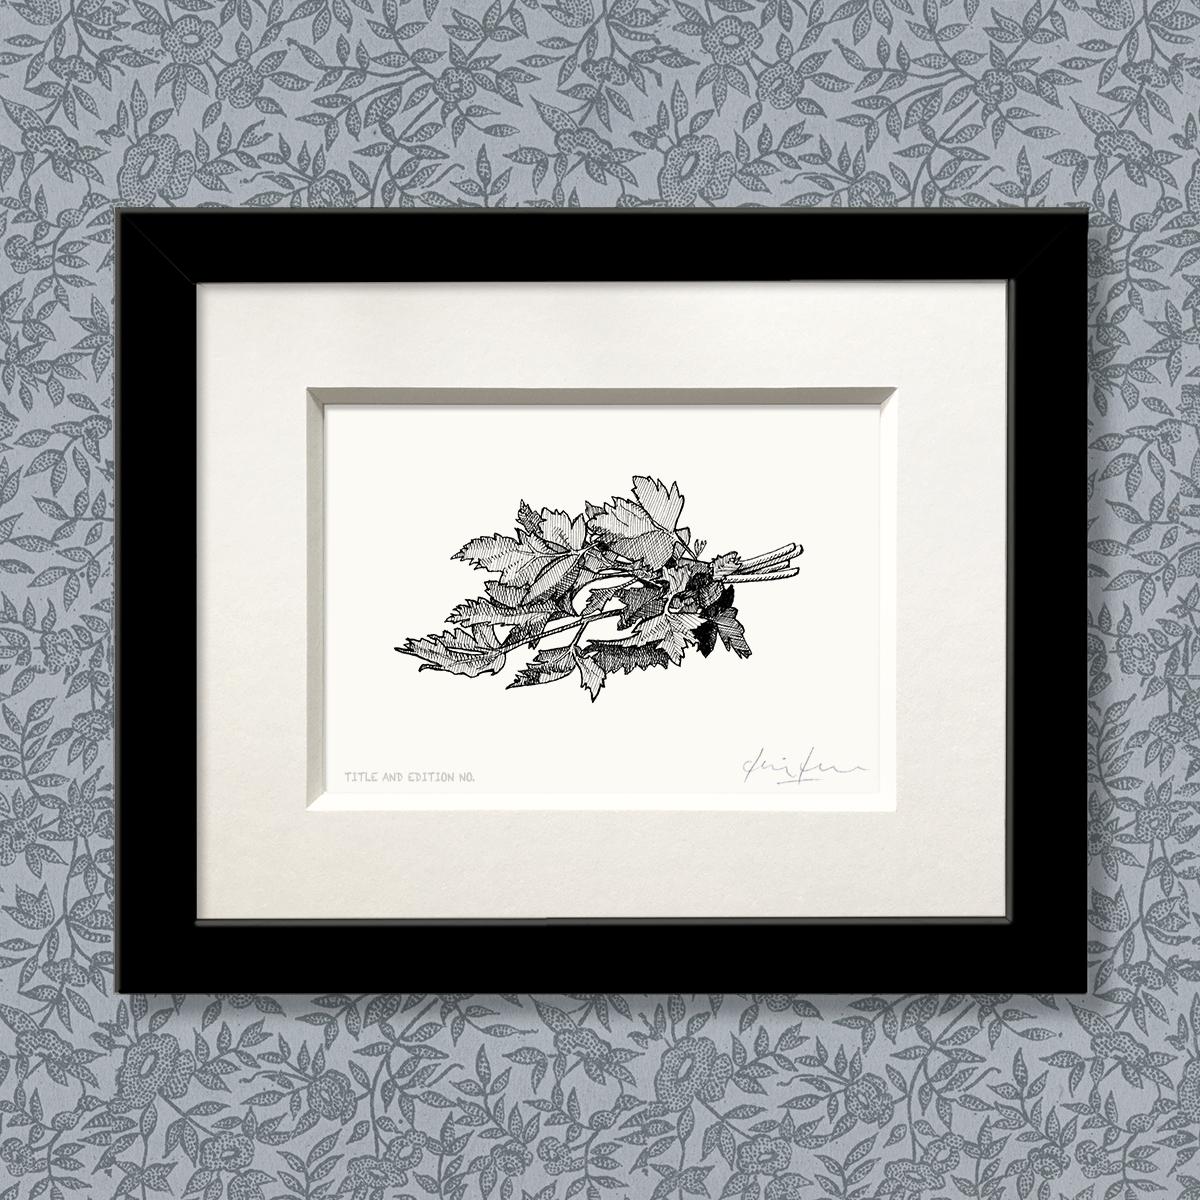 Limited edition print from pen and ink drawing of a bunch of parsley in a black frame